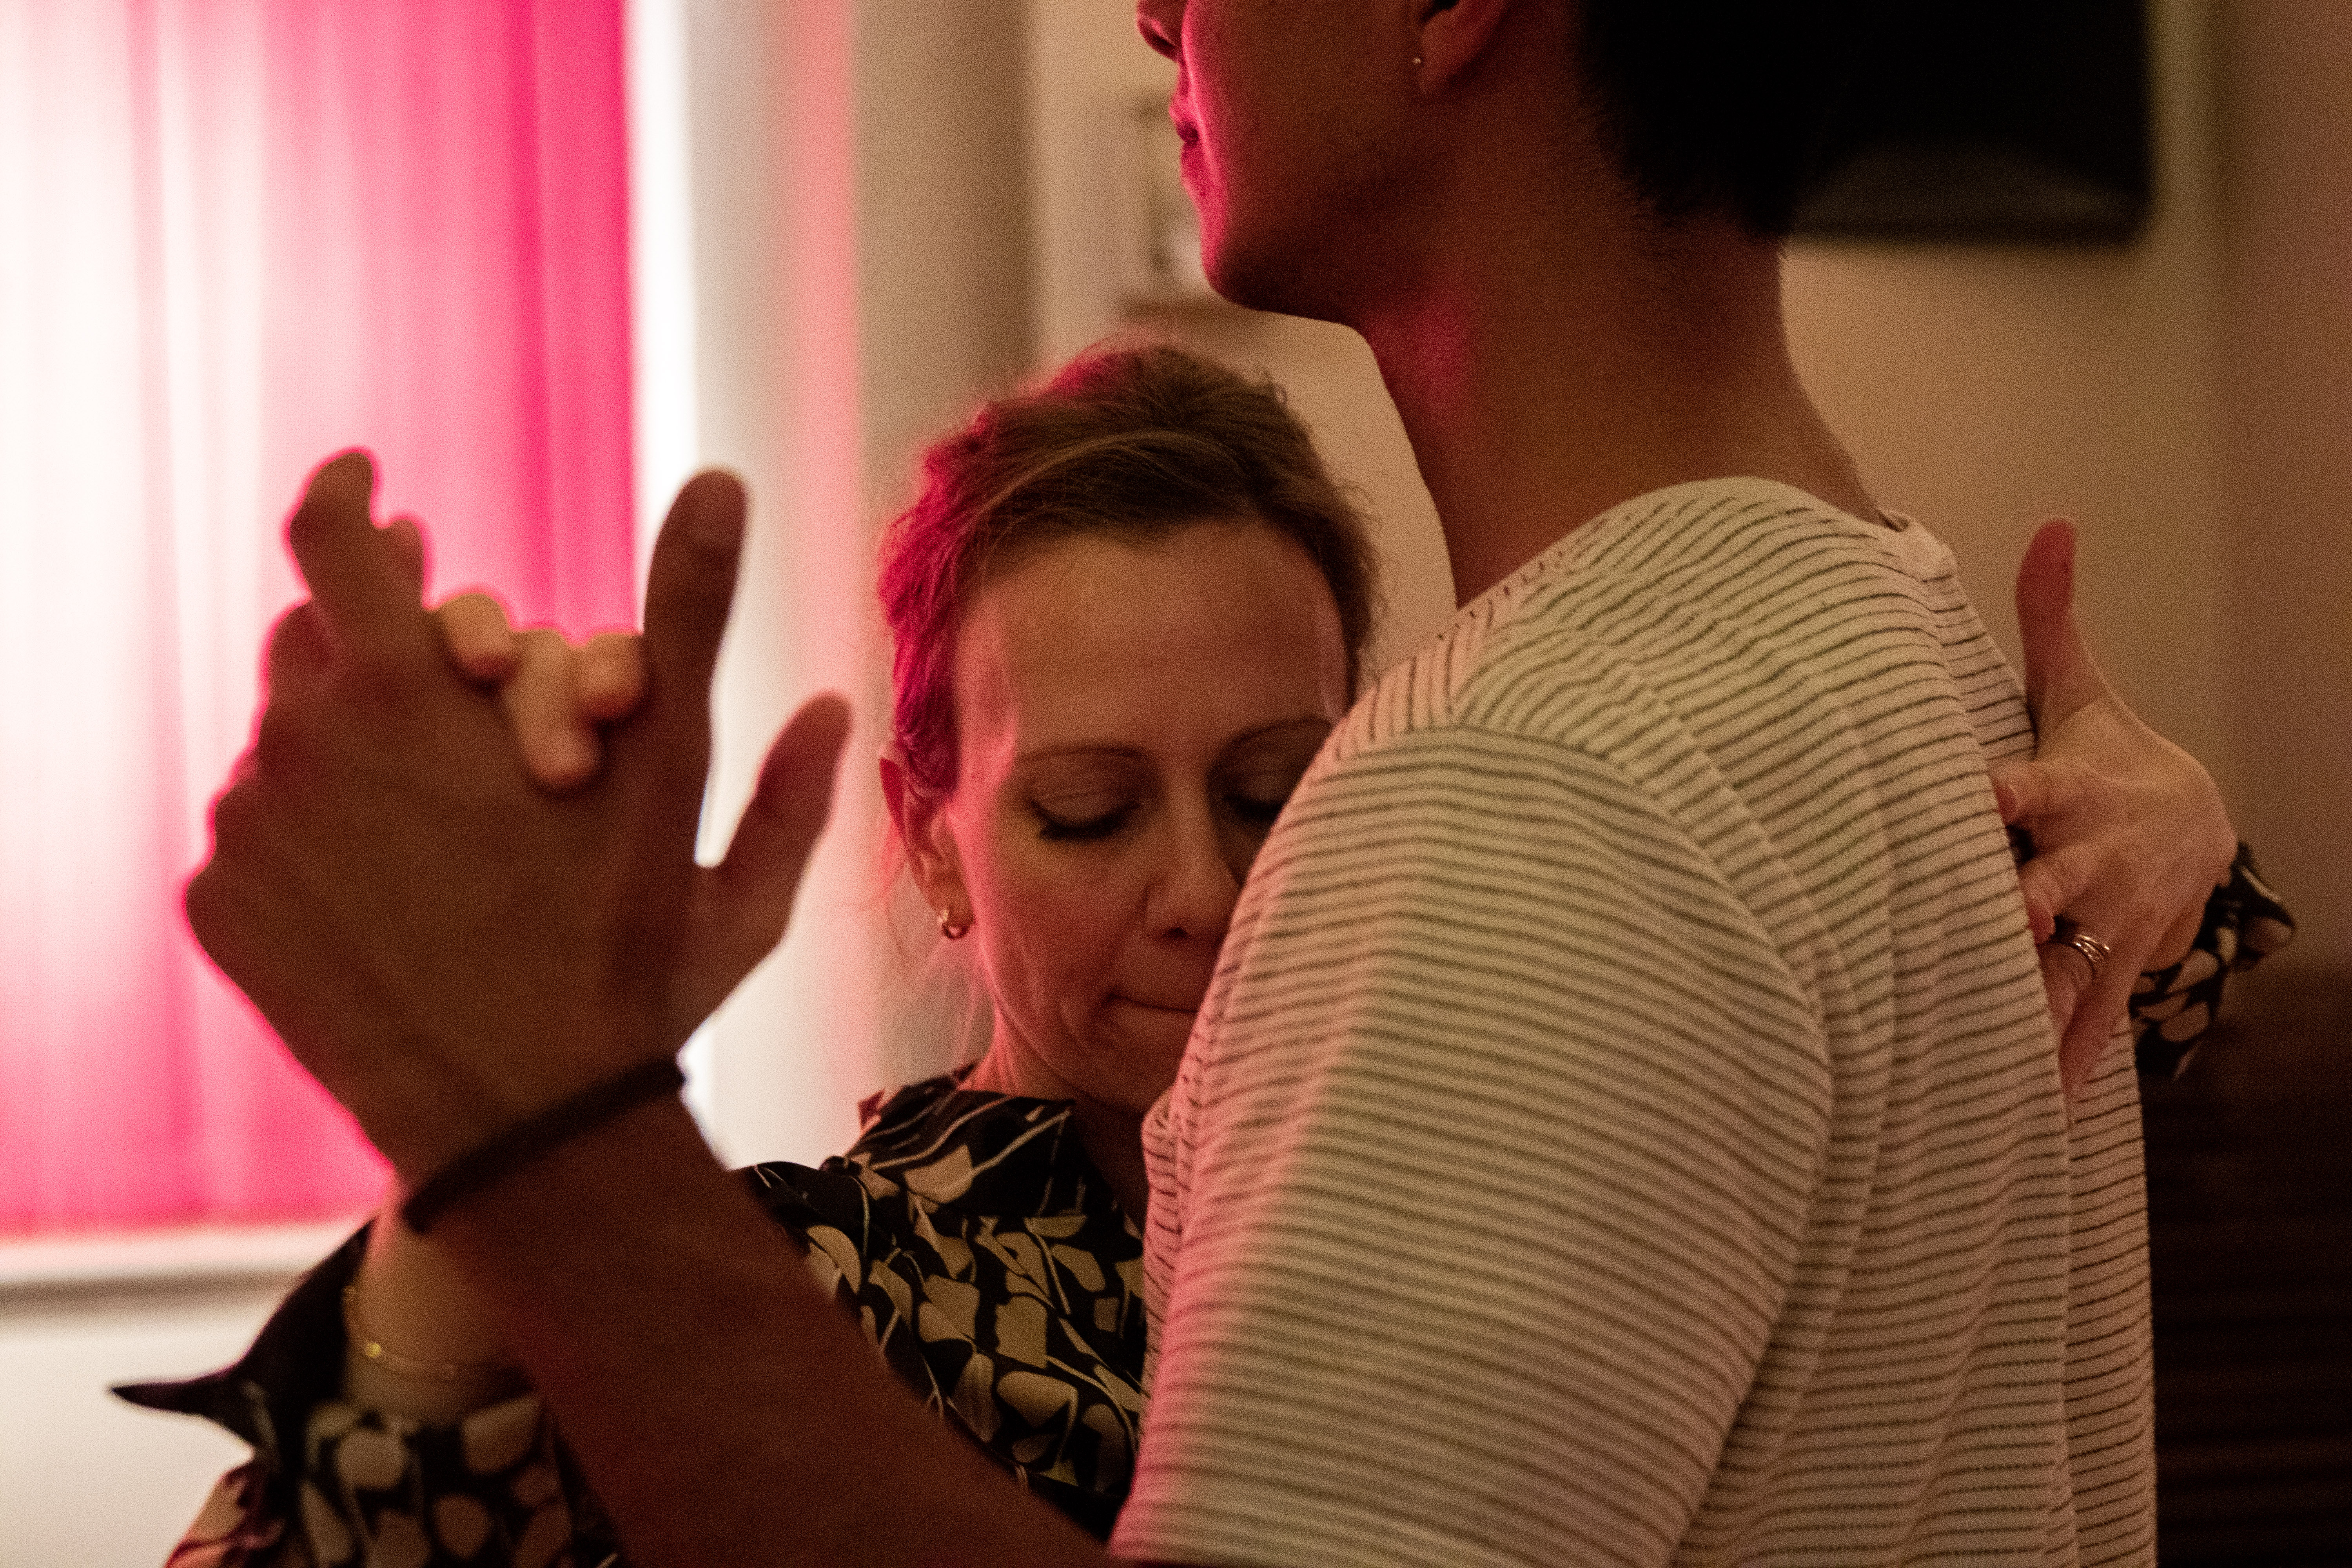 A close-up of a woman and young man dancing. His face is cut off by the frame, but her face presses into his chest. Her eyes are closed, her mouth pressed in concentration. The red light from a curtain graces the left side of her face. 